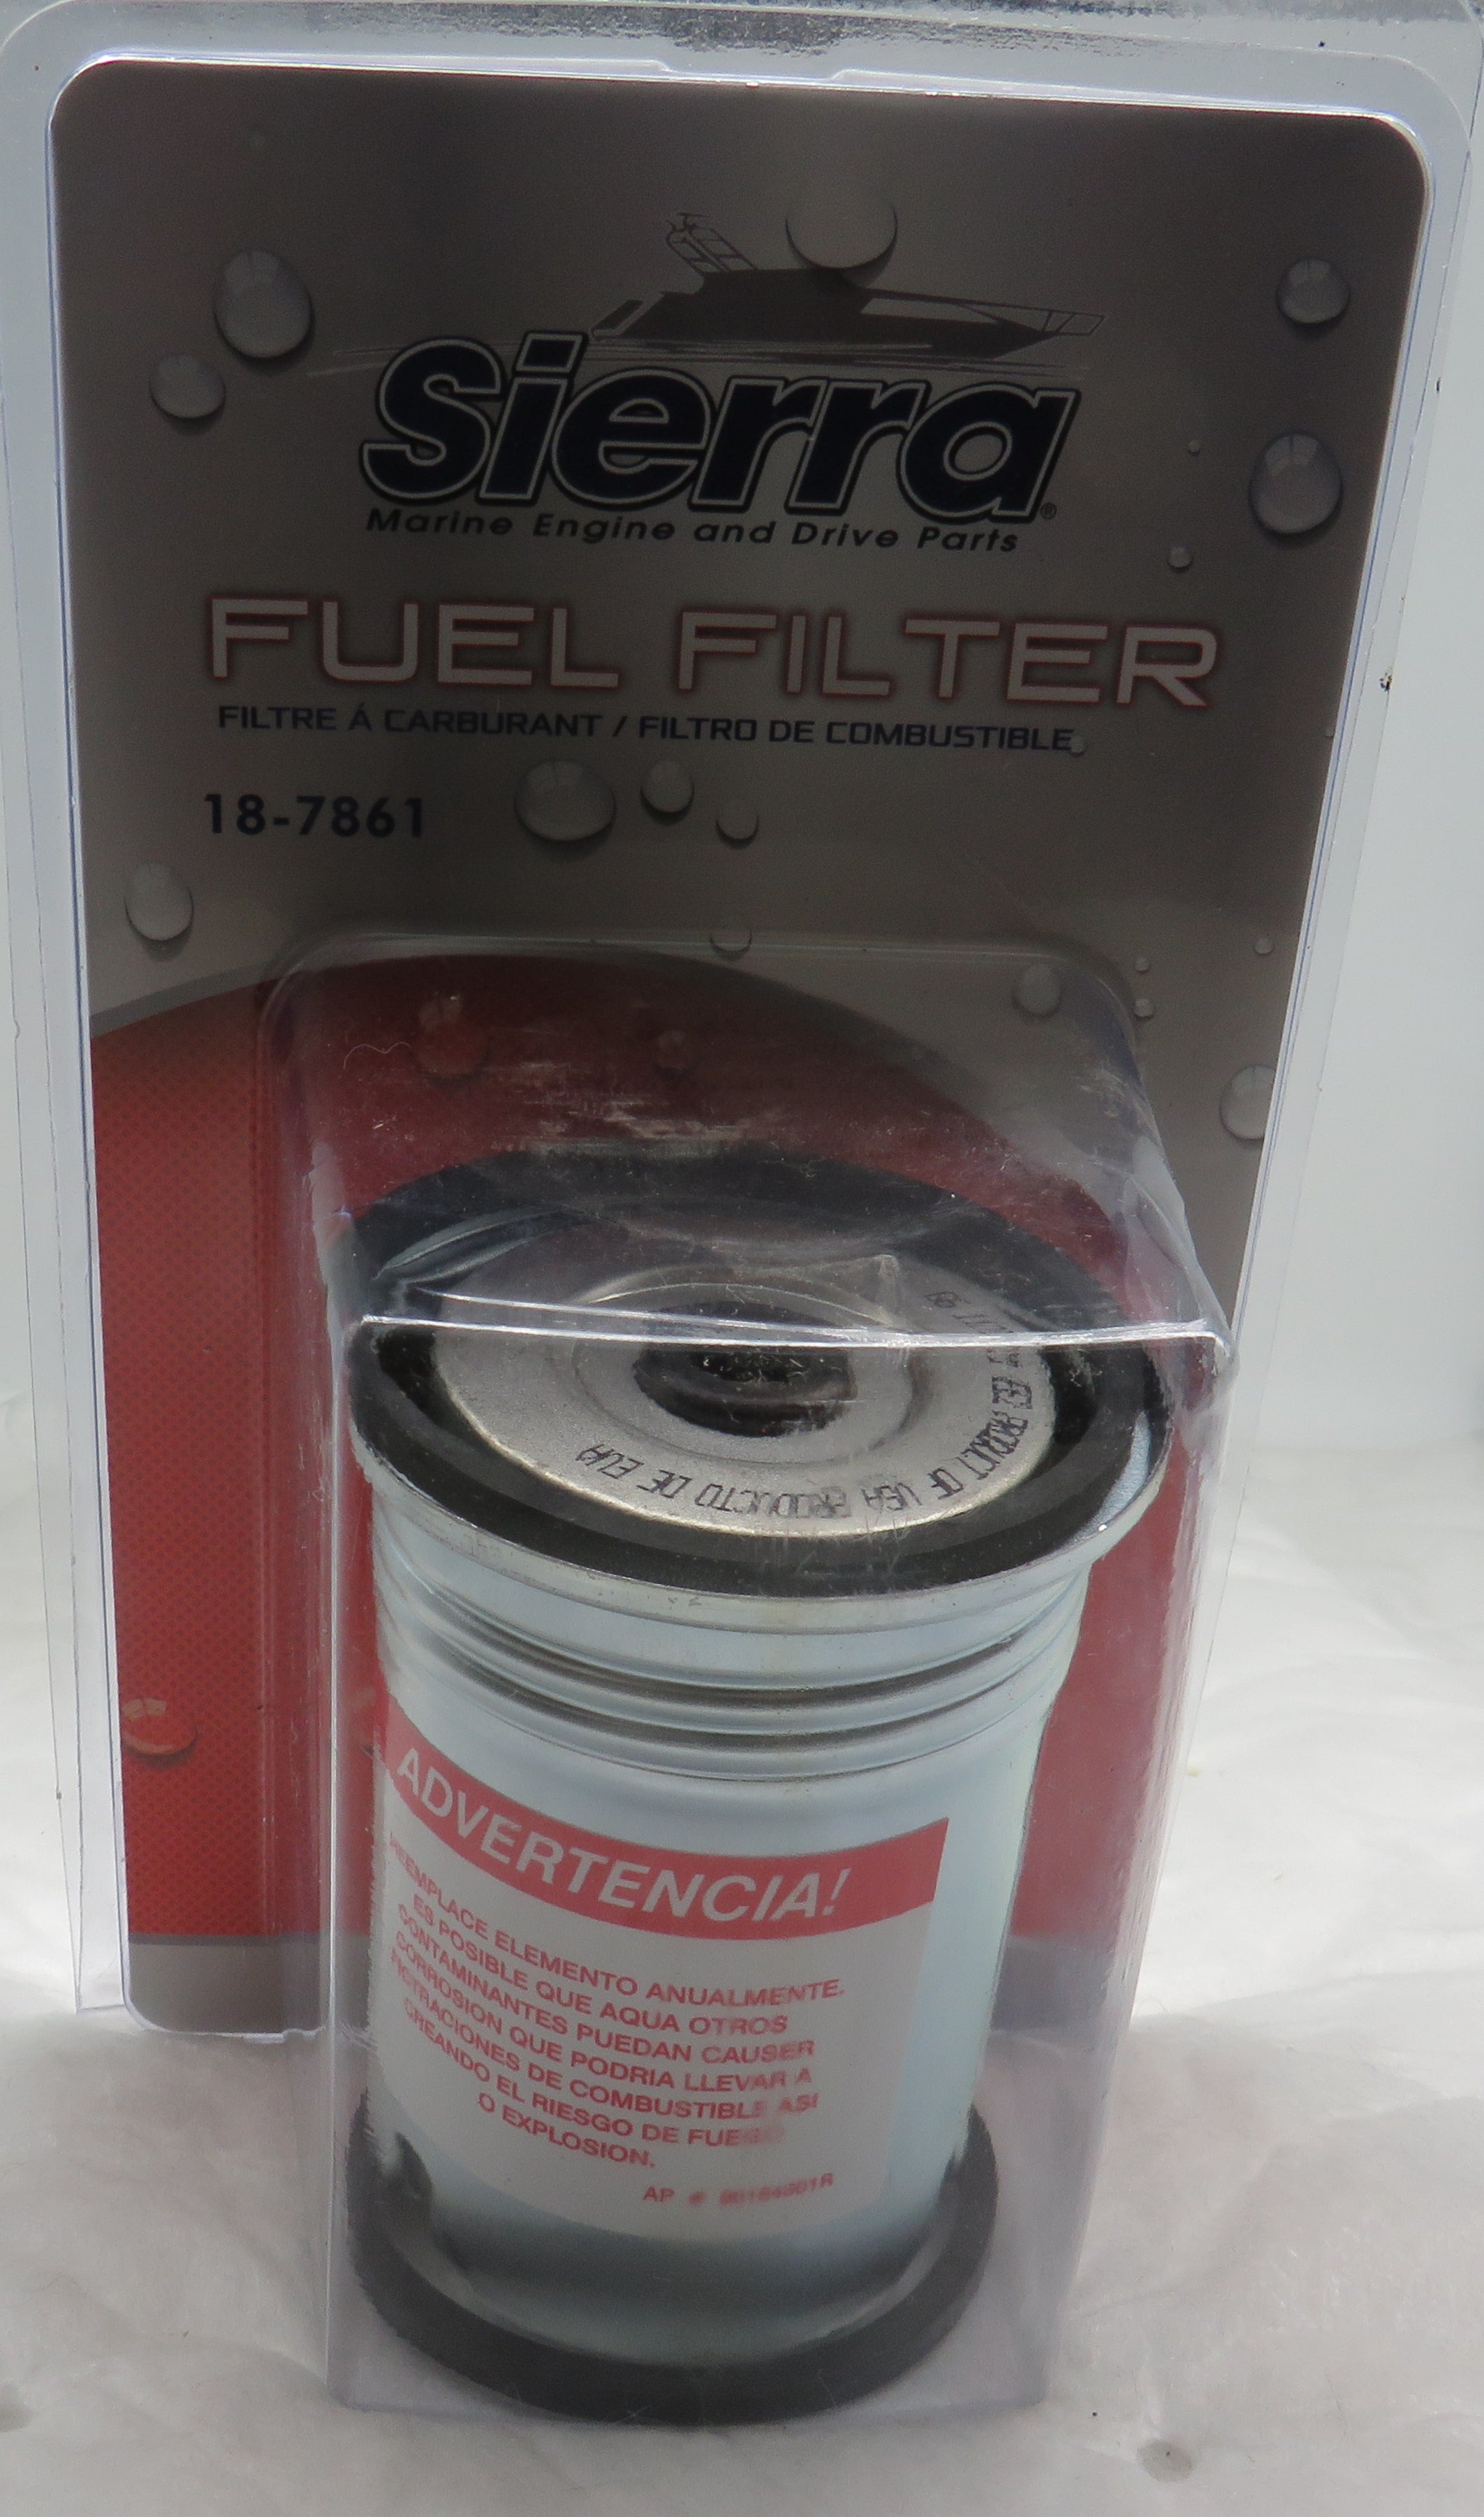 Sierra 18-7861 OM Fuel Filter & Canister 98191 (Replaces OMC 981911) For Crusader